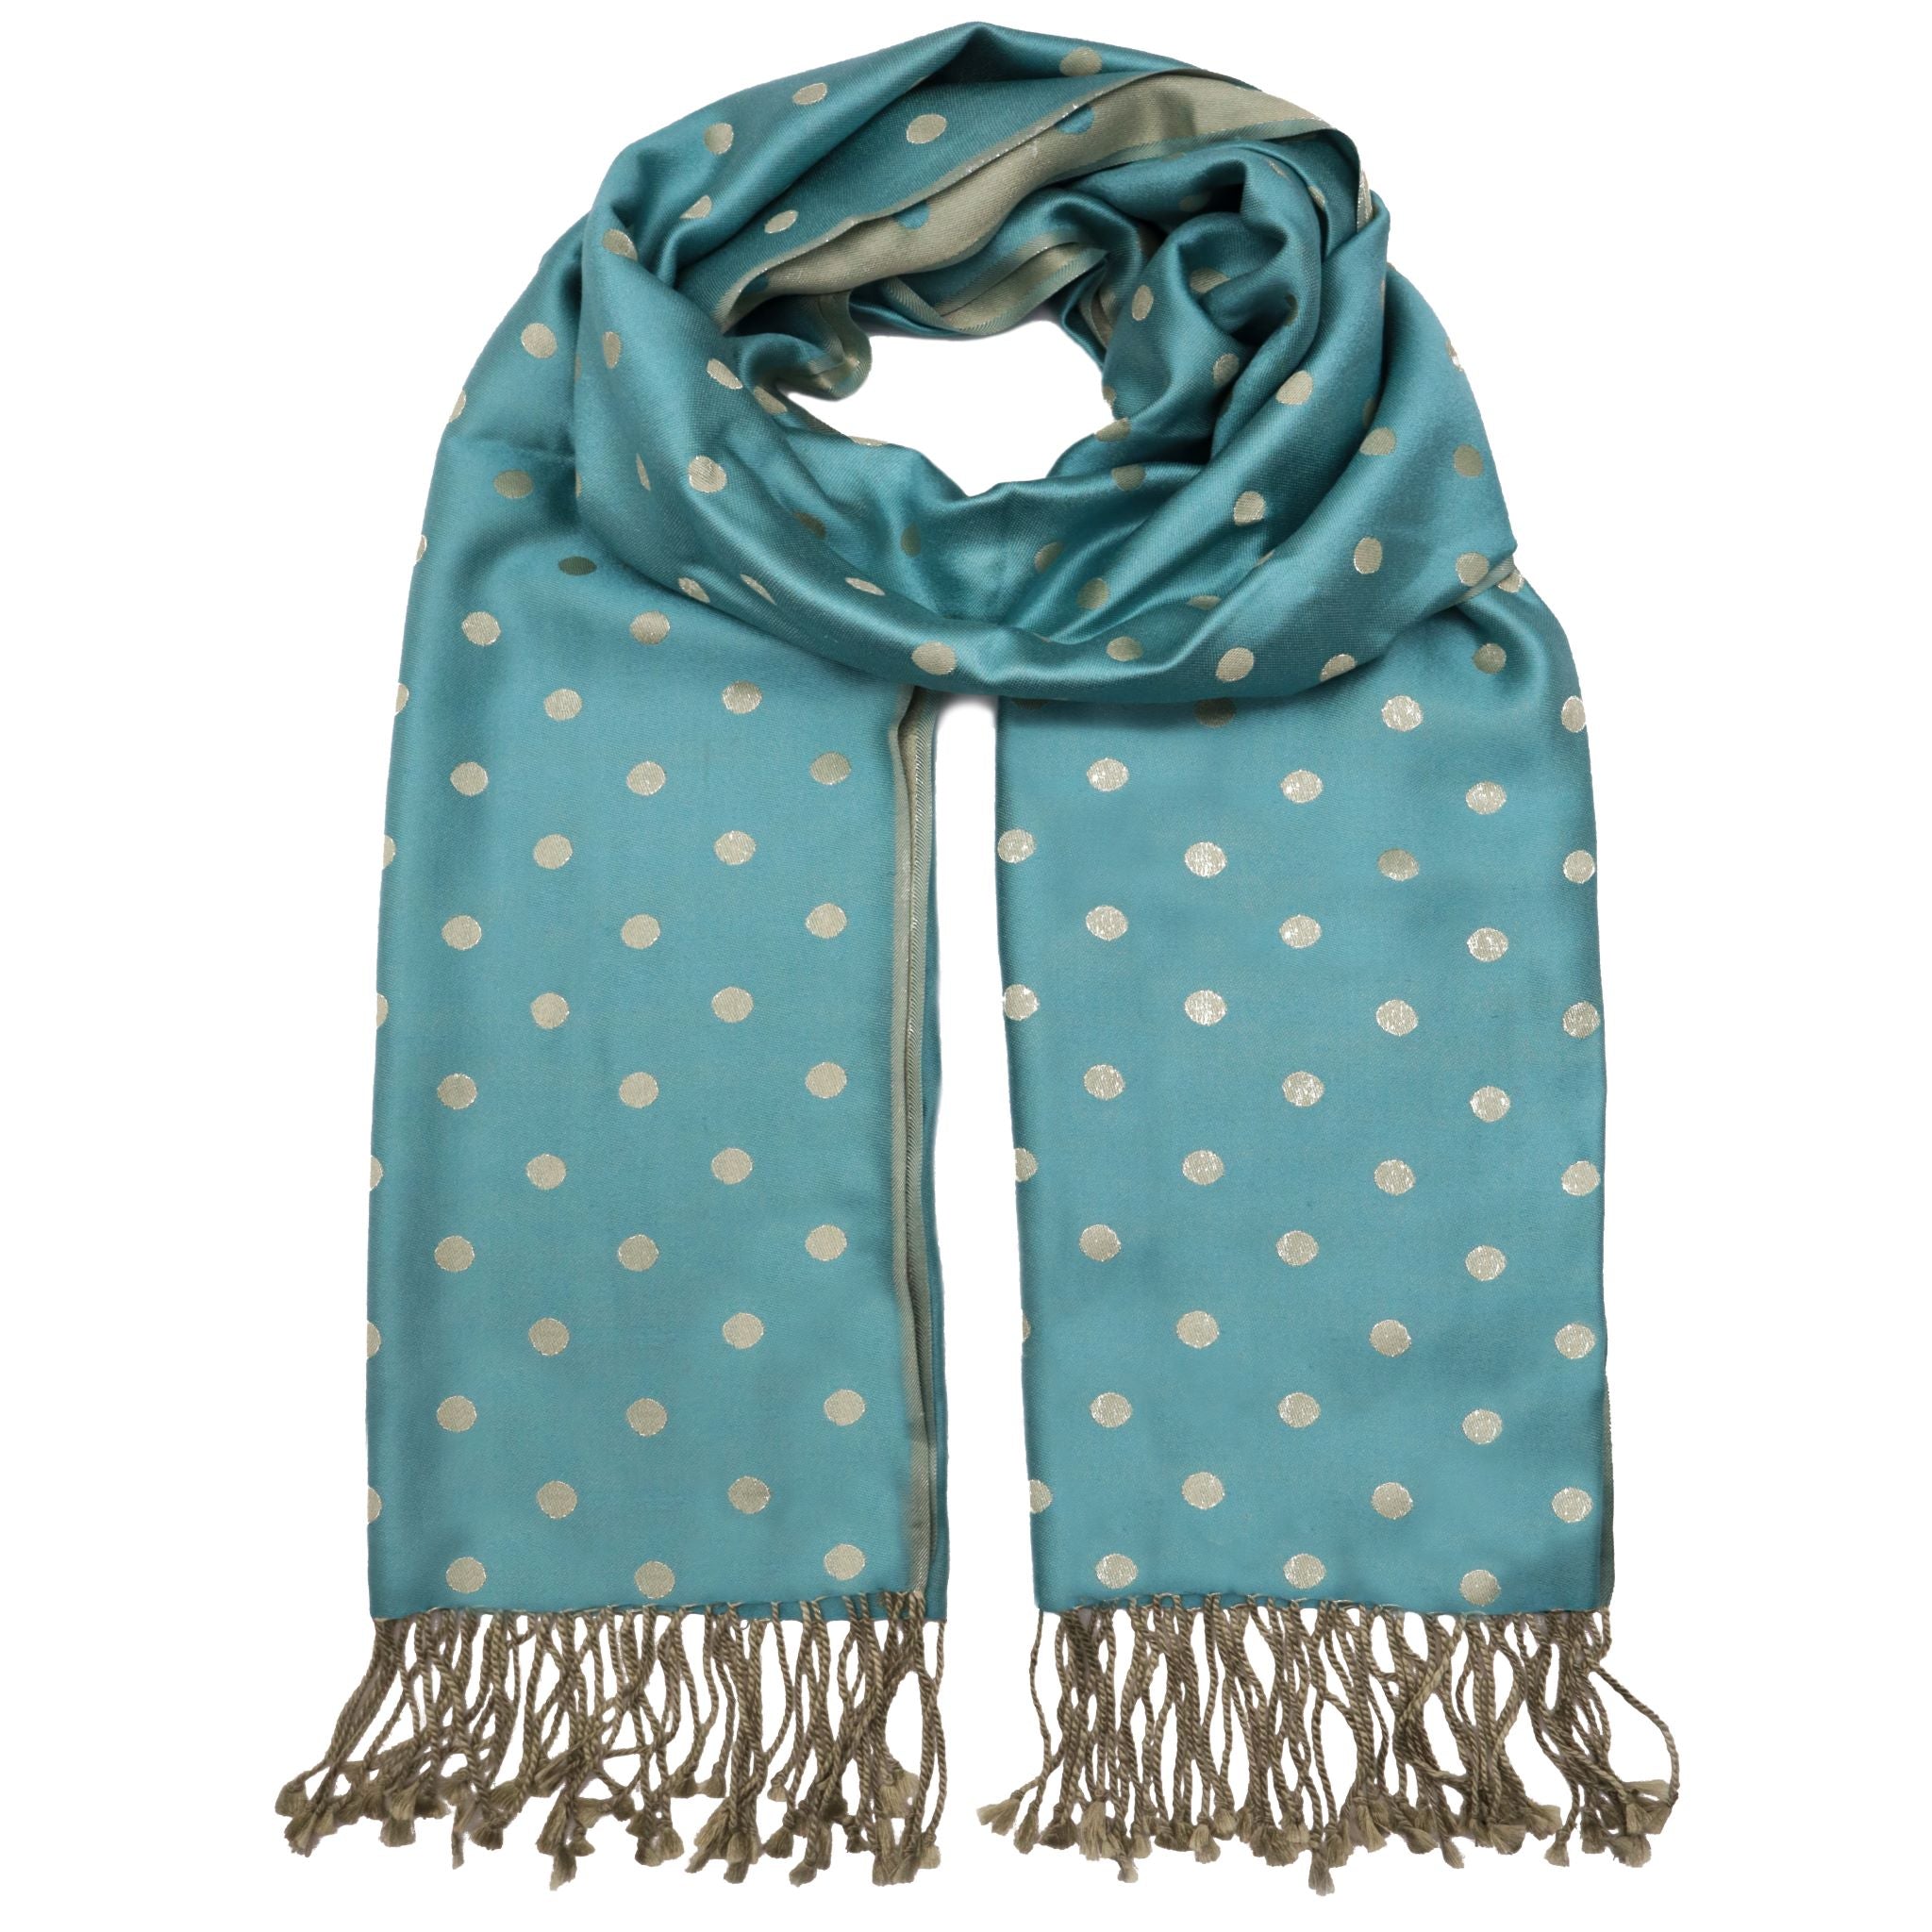 Silk Scarf with Spots - Turquoise